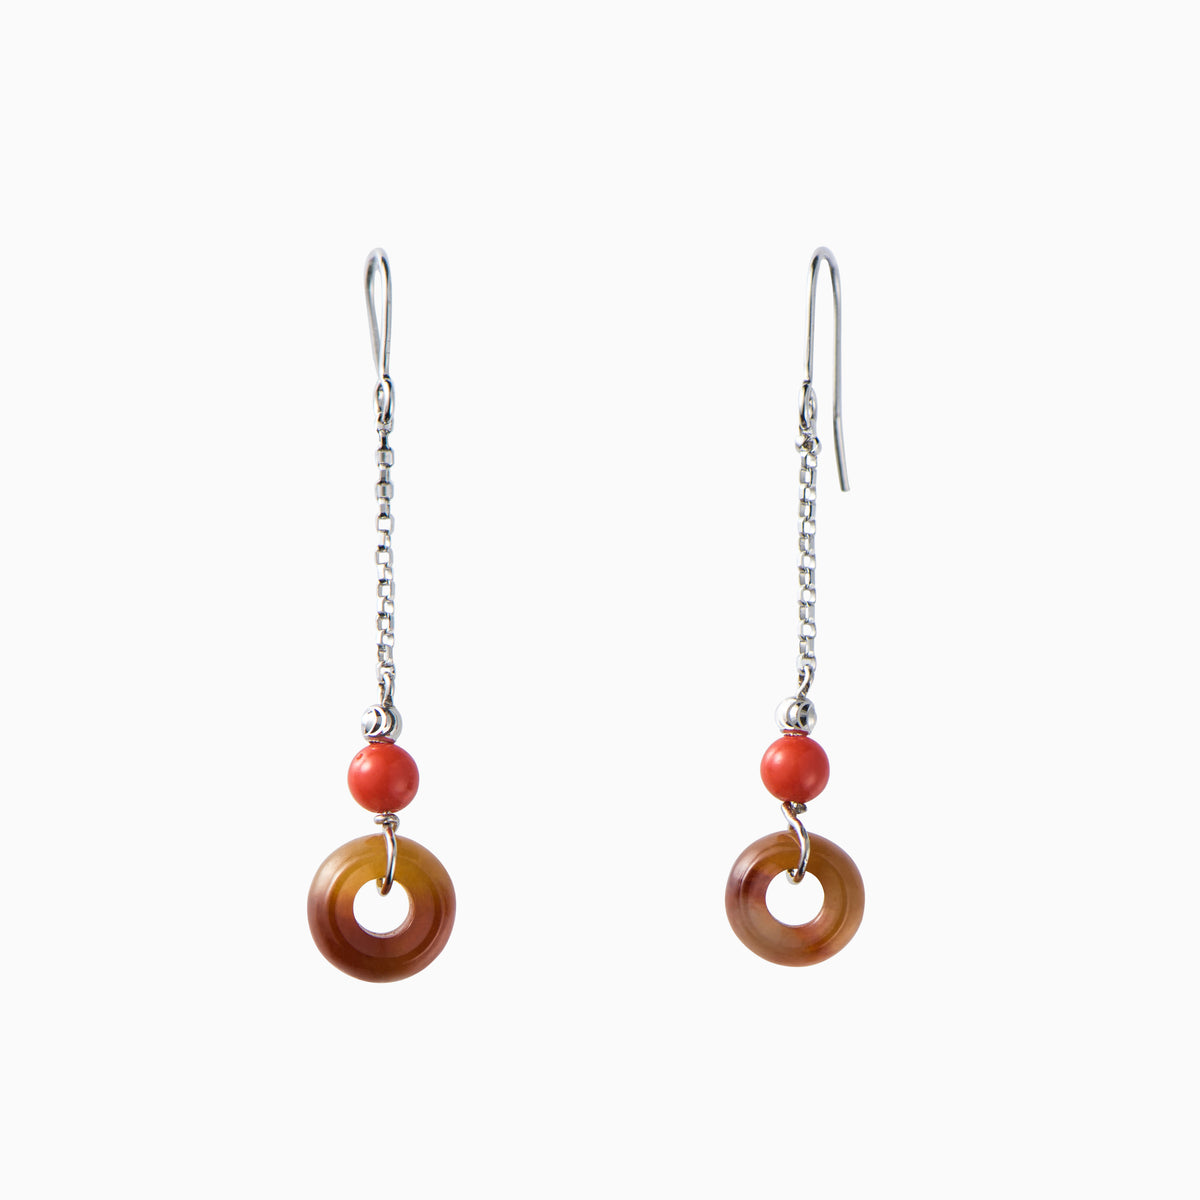 Warm red jade earrings with coral bead